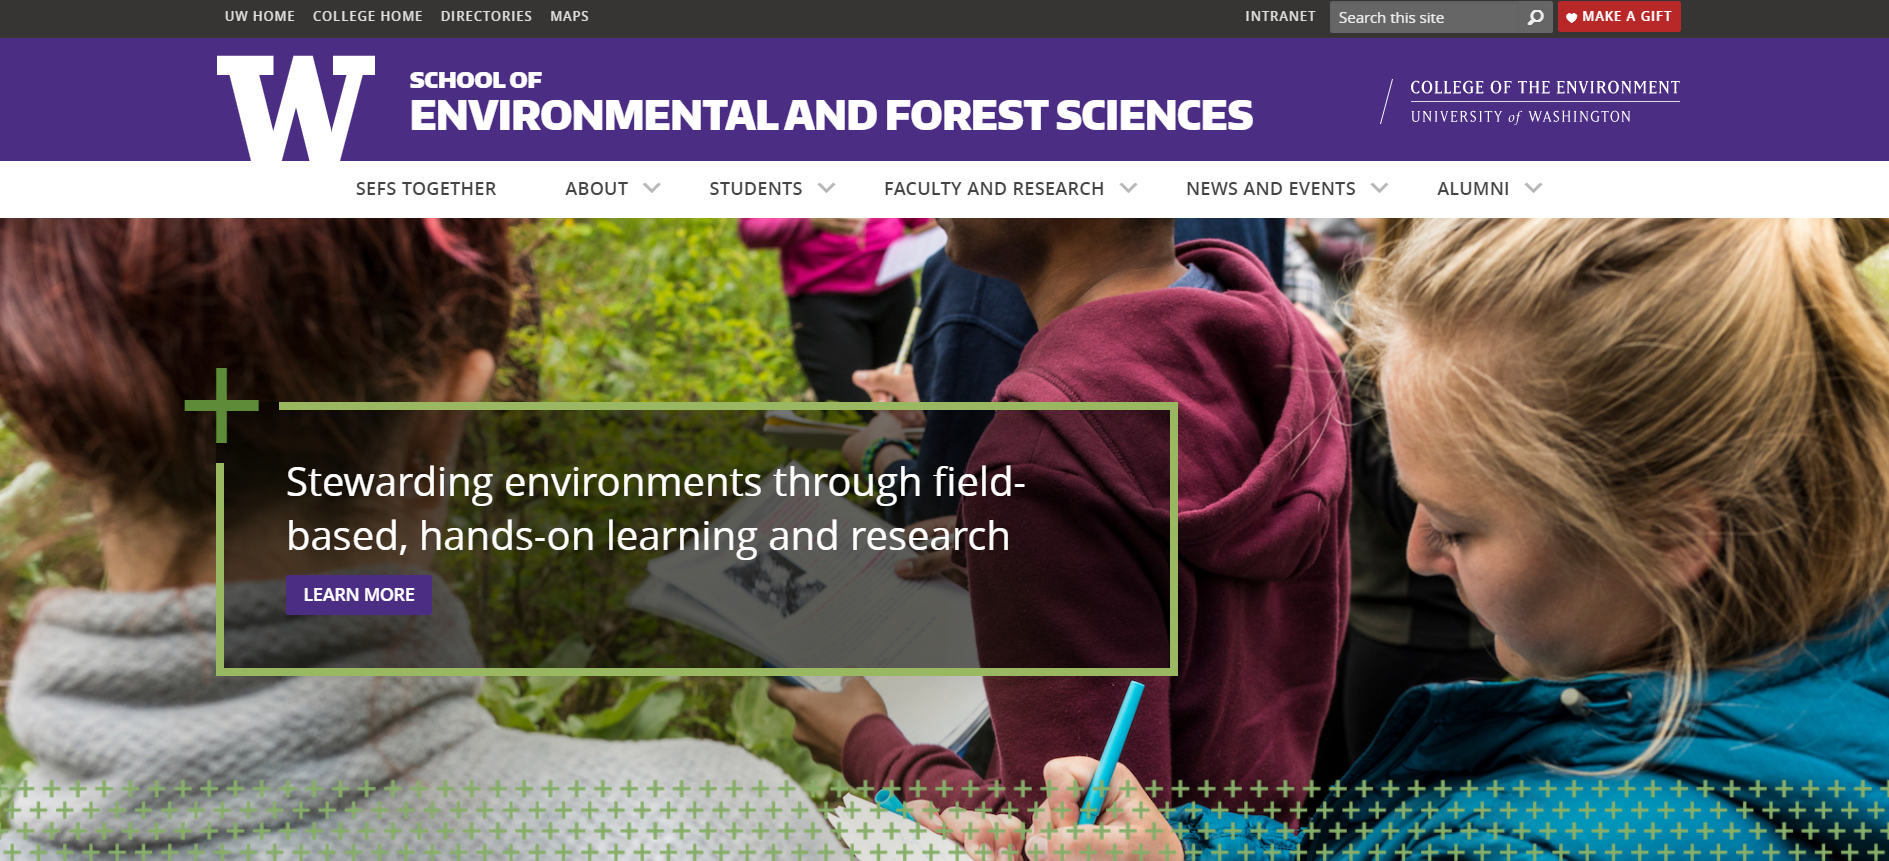 UW School of Environmental and Forest Sciences